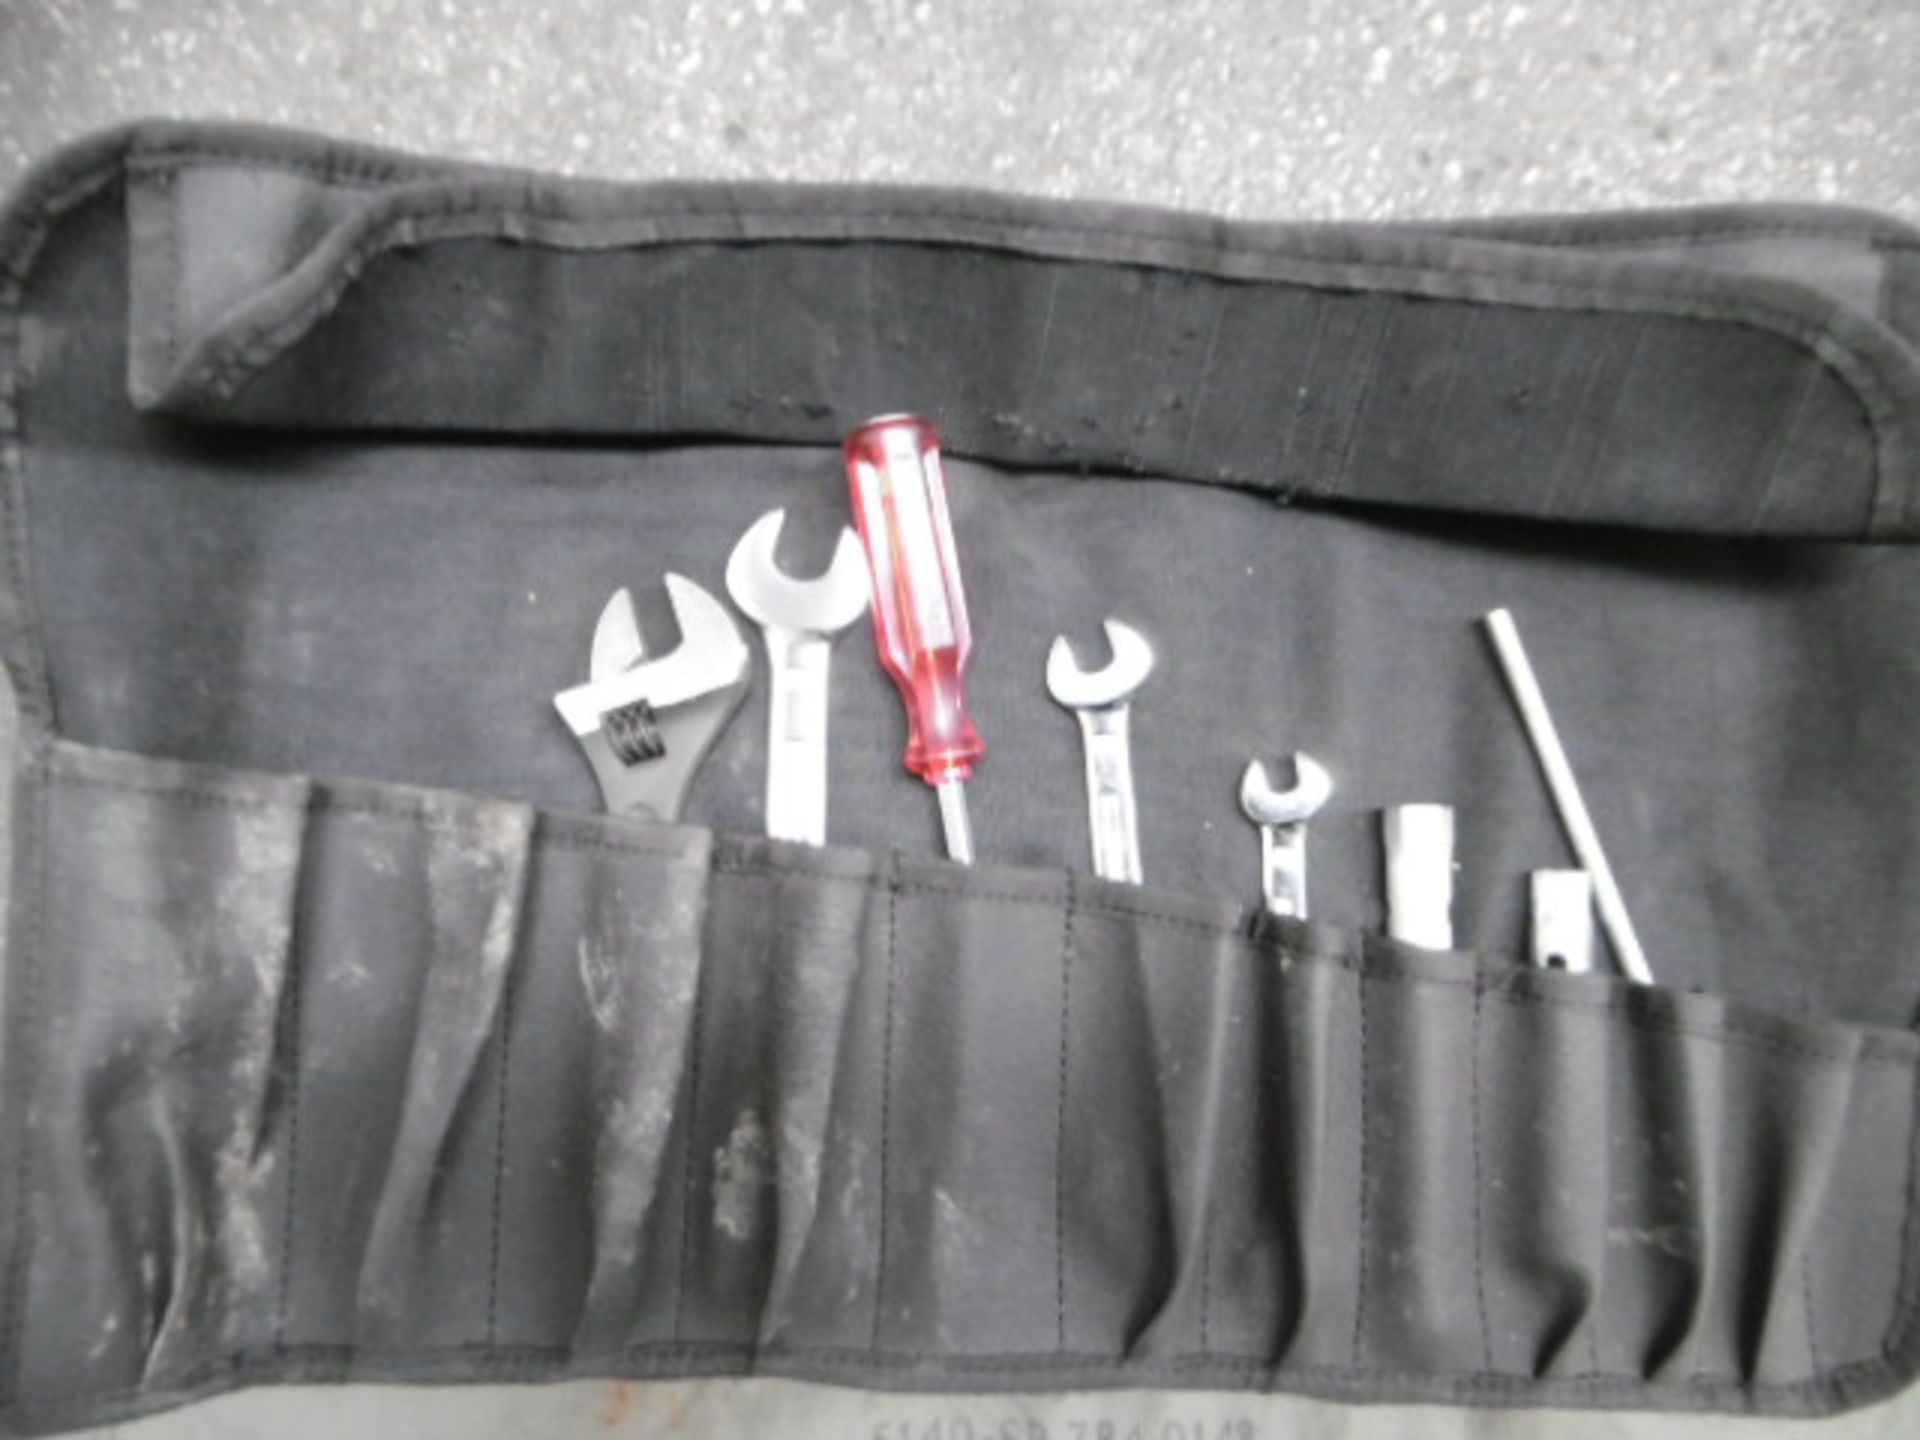 5 x Land Rover FFR Tool Kits - Image 2 of 3